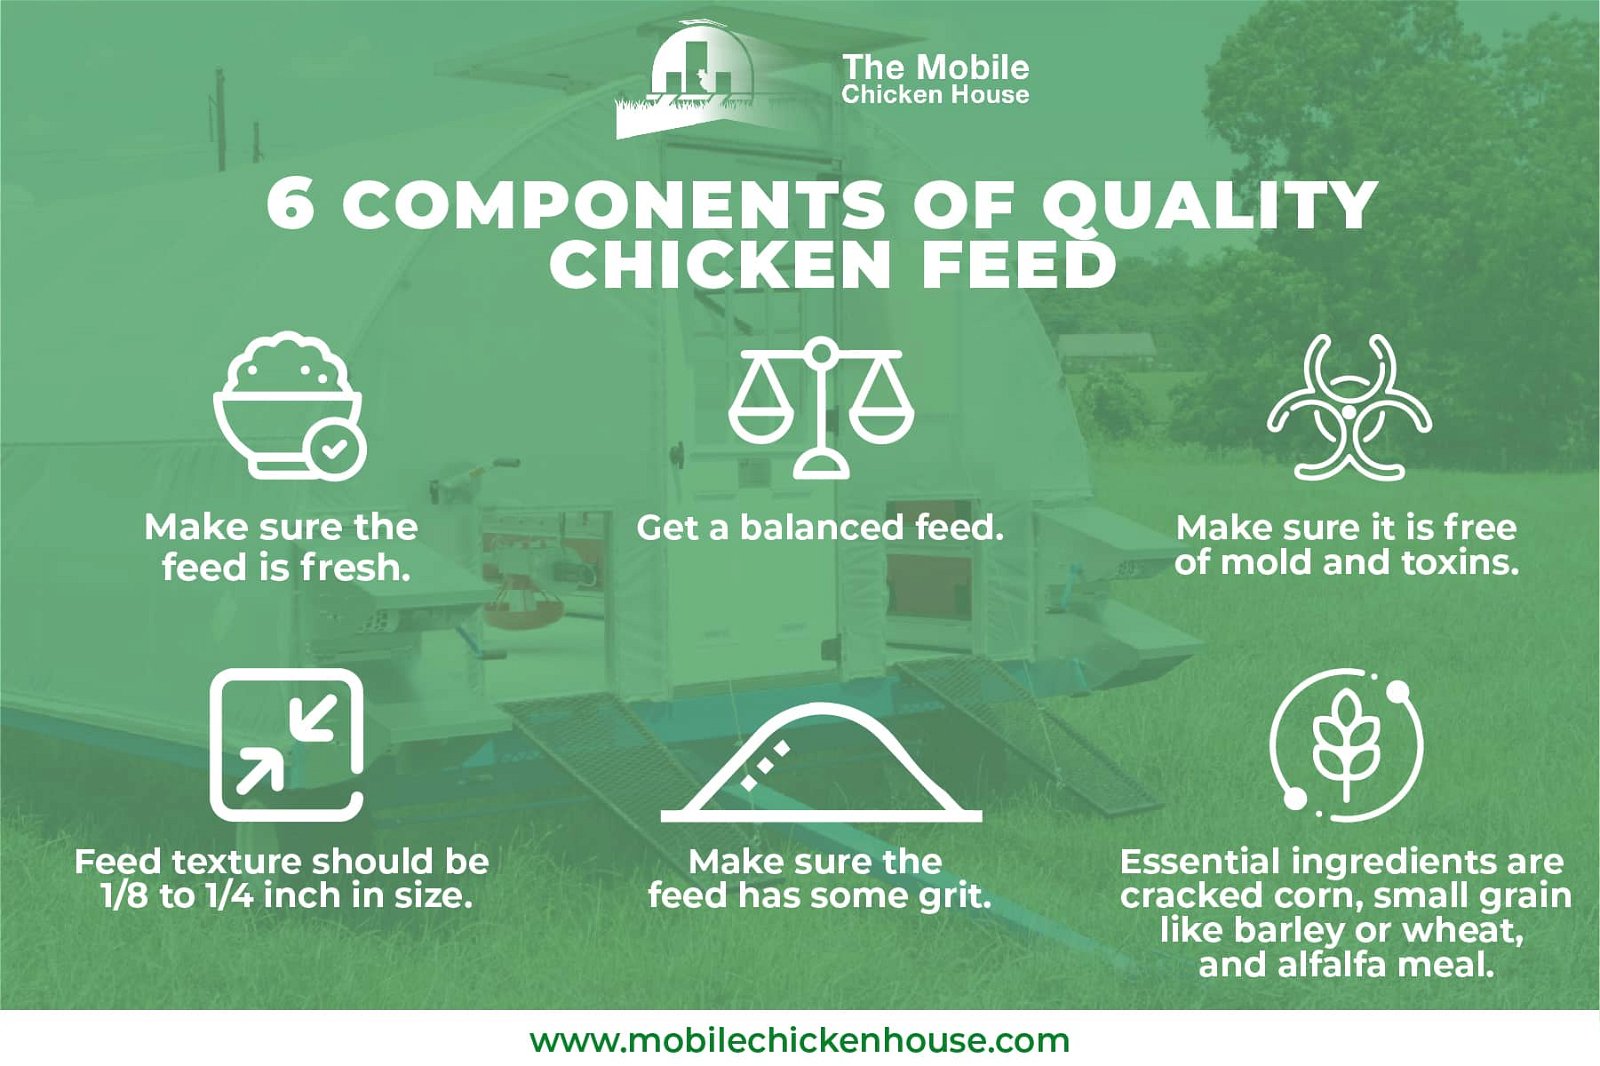 6 components of quality chicken feed